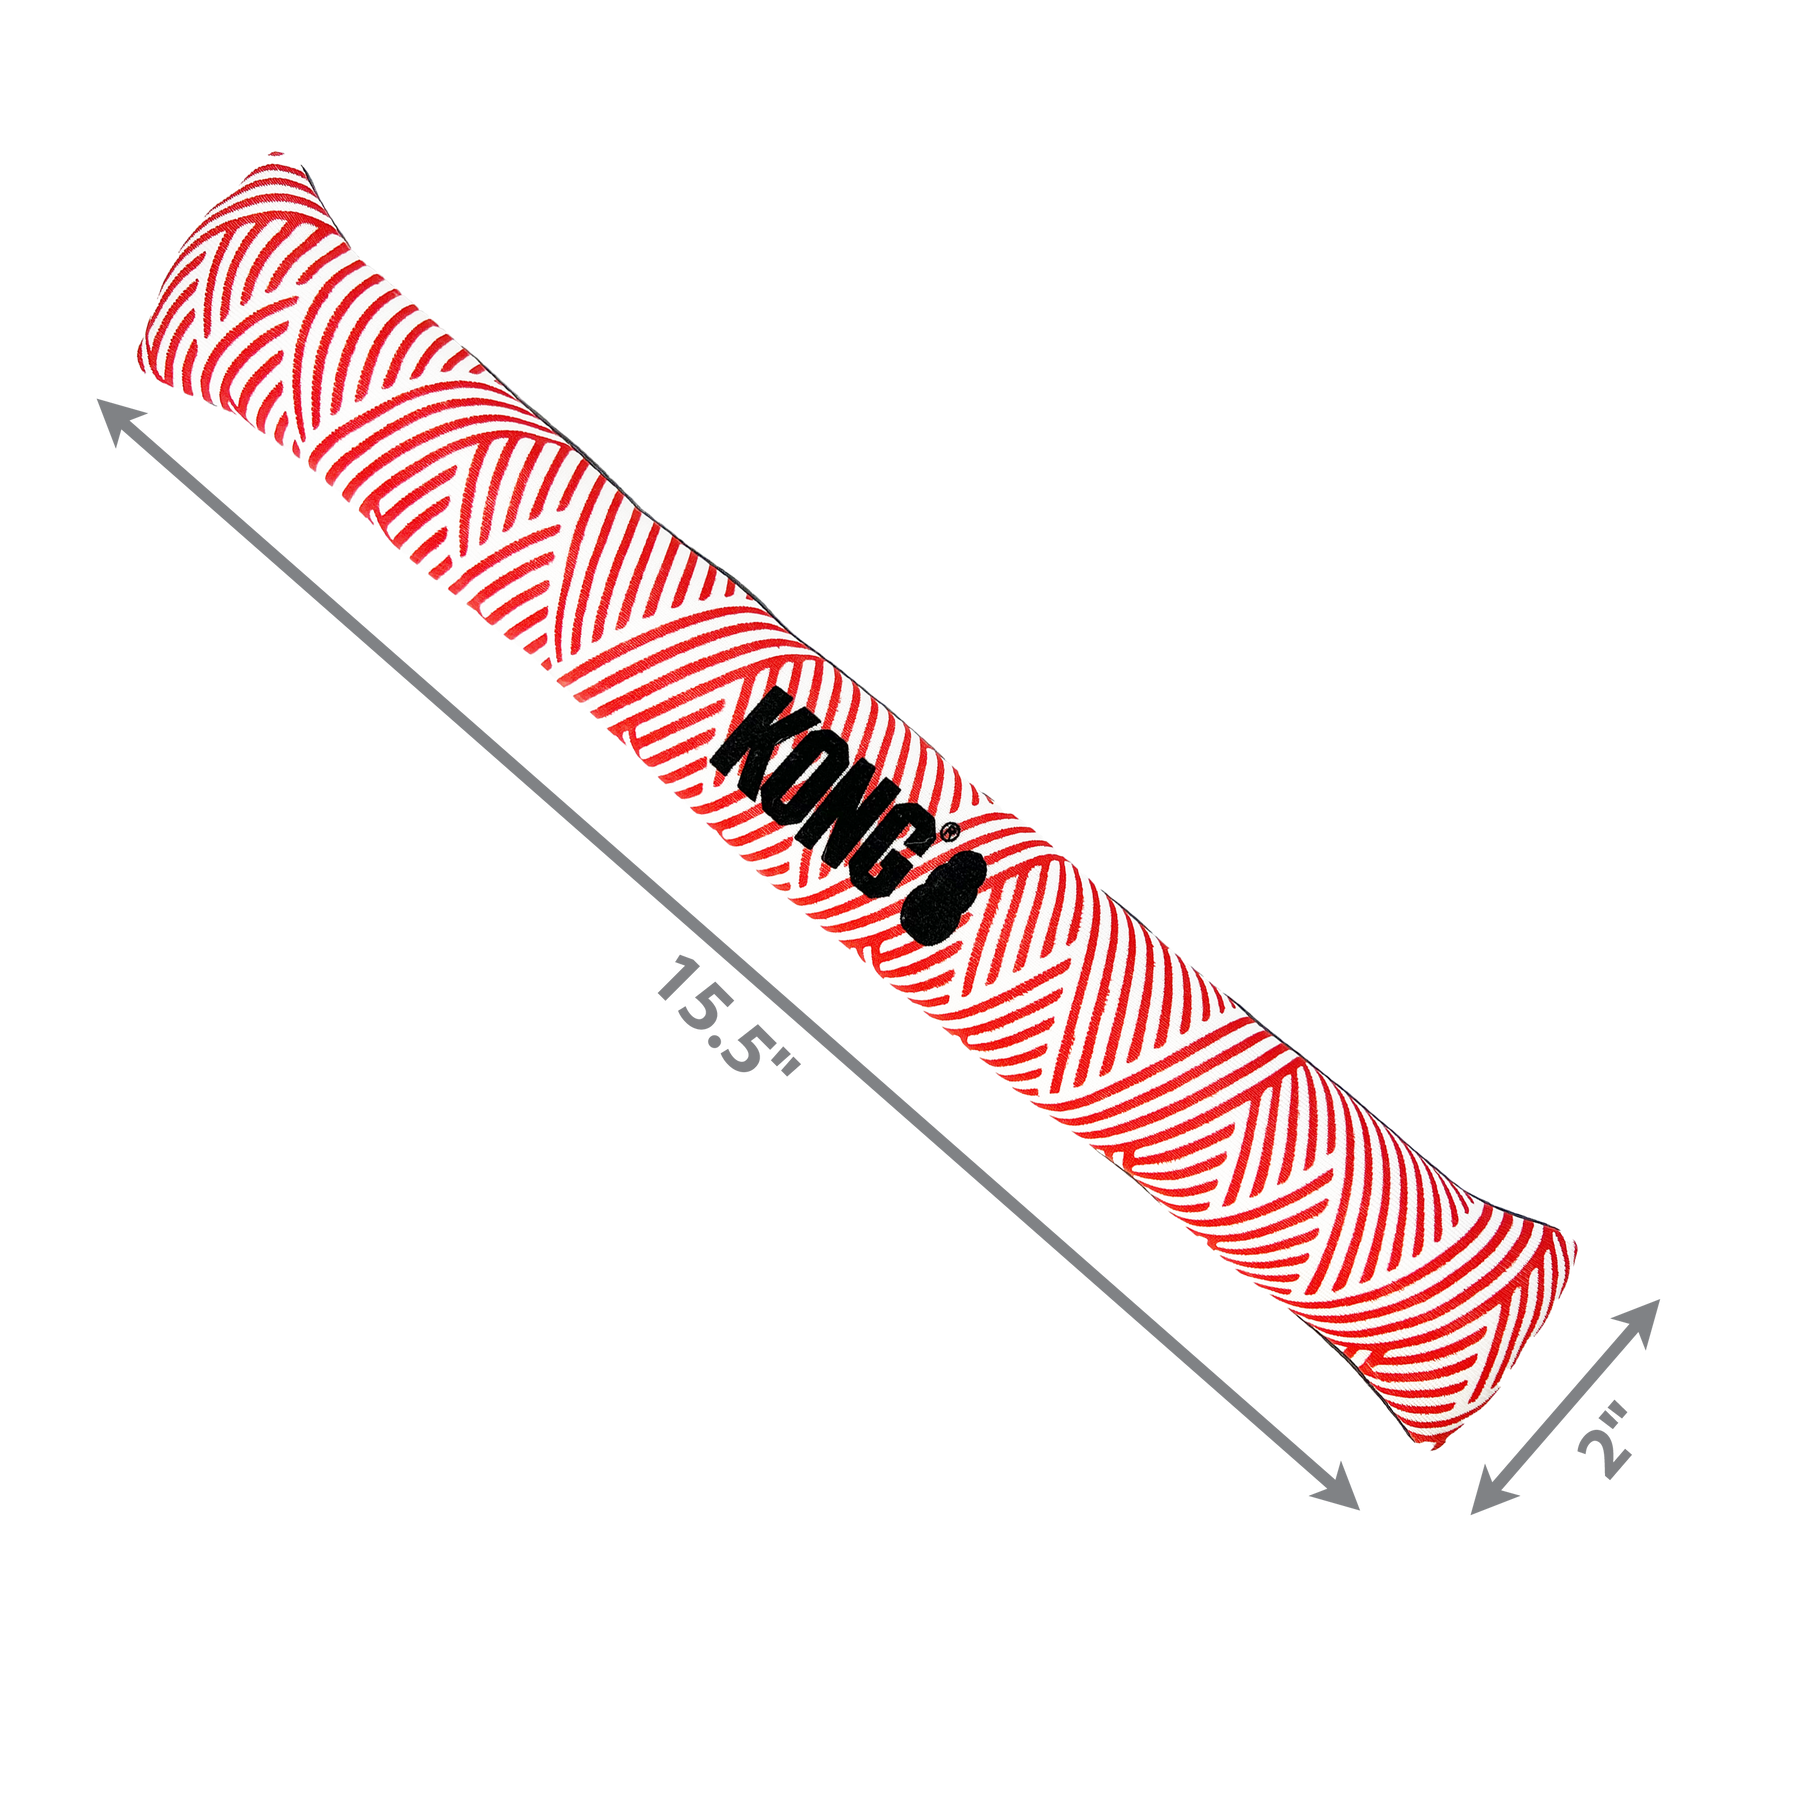 Maxx Stick With Squeaker -Flat Fabric Resists Puncture